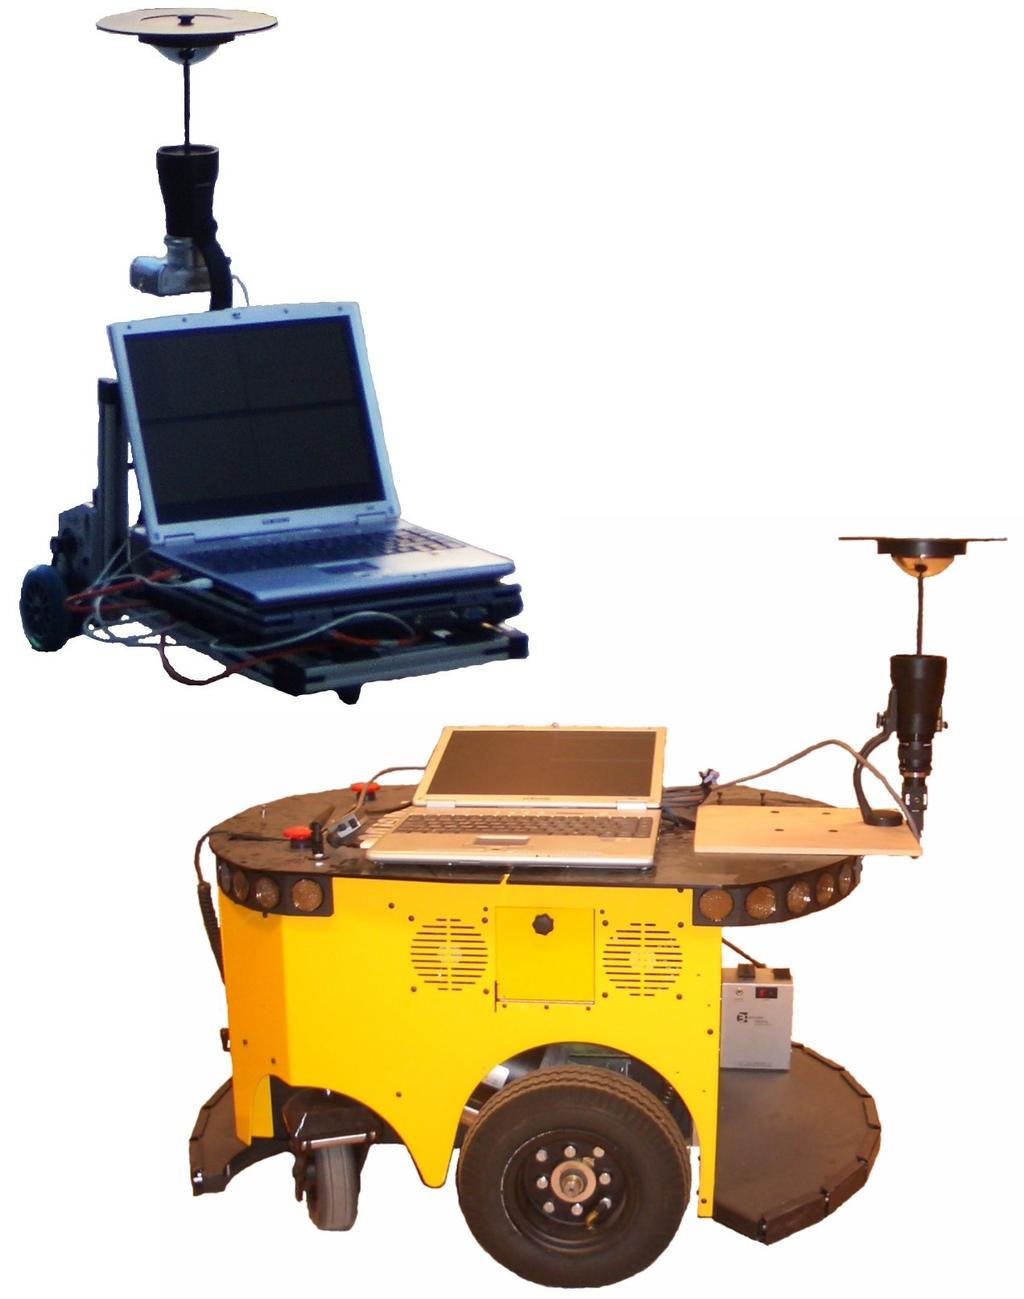 Localization Localization and vision Initial approach approach Mobile robots